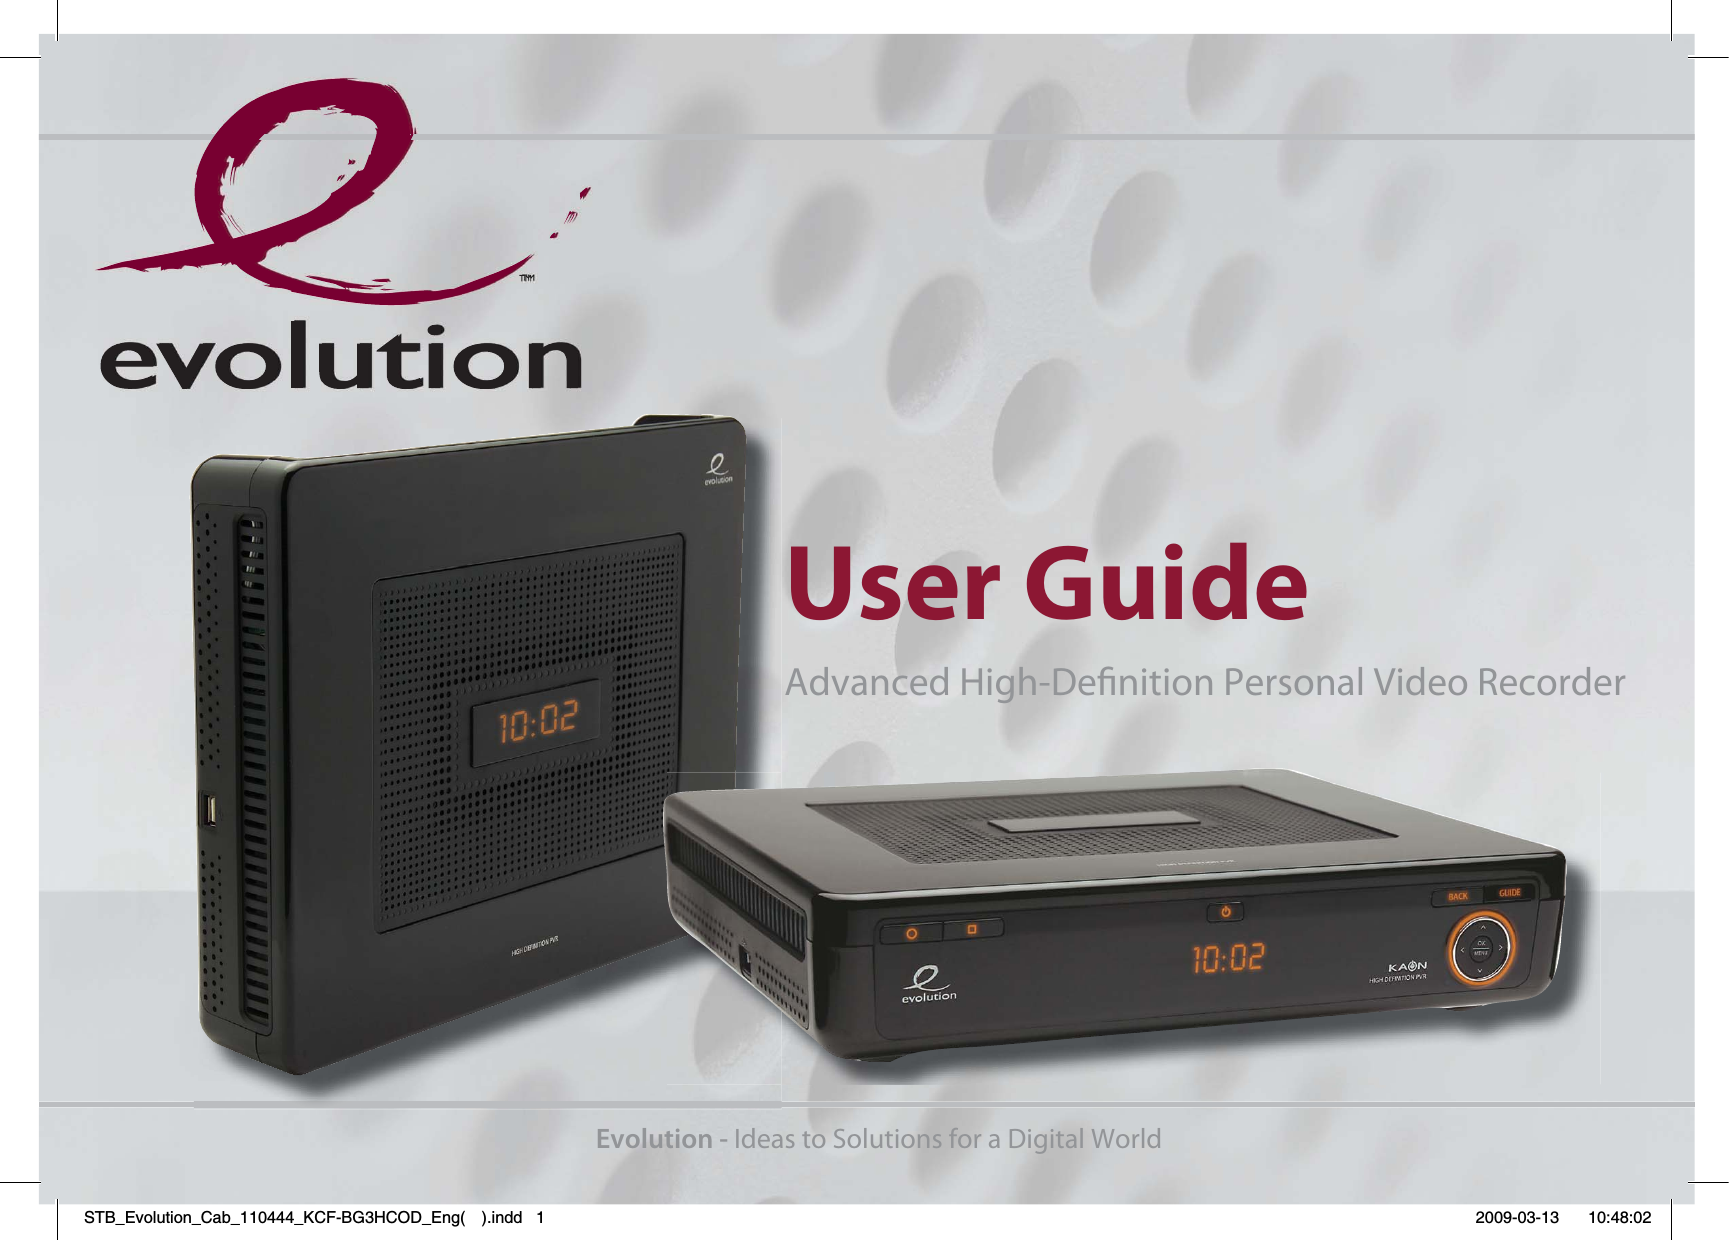 User GuideEvolution - Ideas to Solutions for a Digital WorldAdvanced High-Denition Personal Video Recorder STB_Evolution_Cab_110444_KCF-BG3HCOD_Eng( ).indd   1 2009-03-13     10:48:02